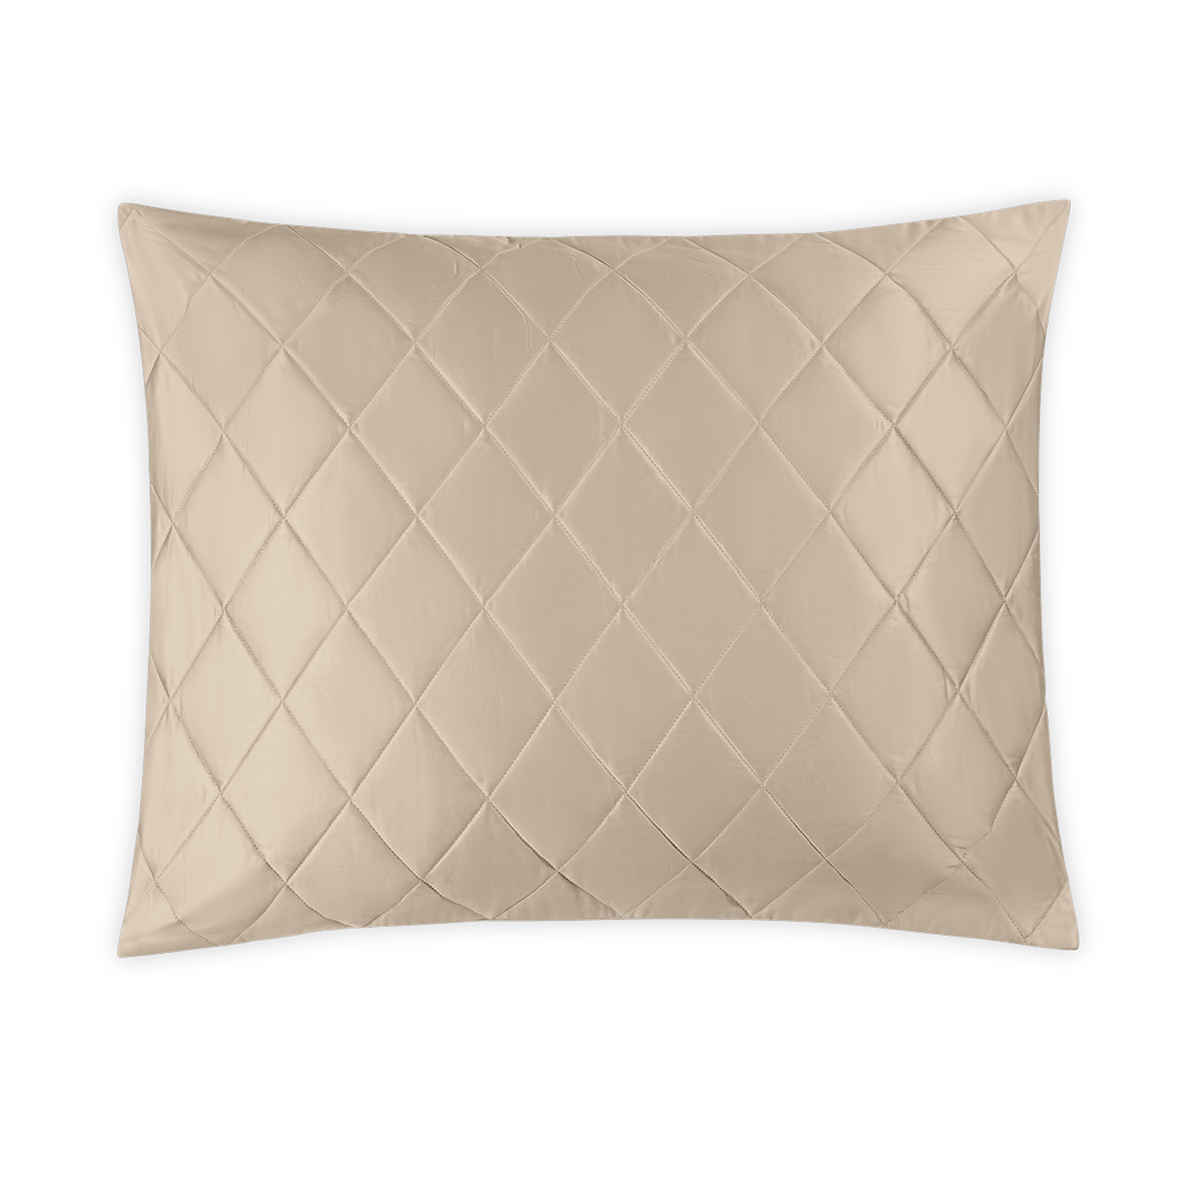 Silo Image of Matouk Nocturne Quilted Bedding Sham in Khaki